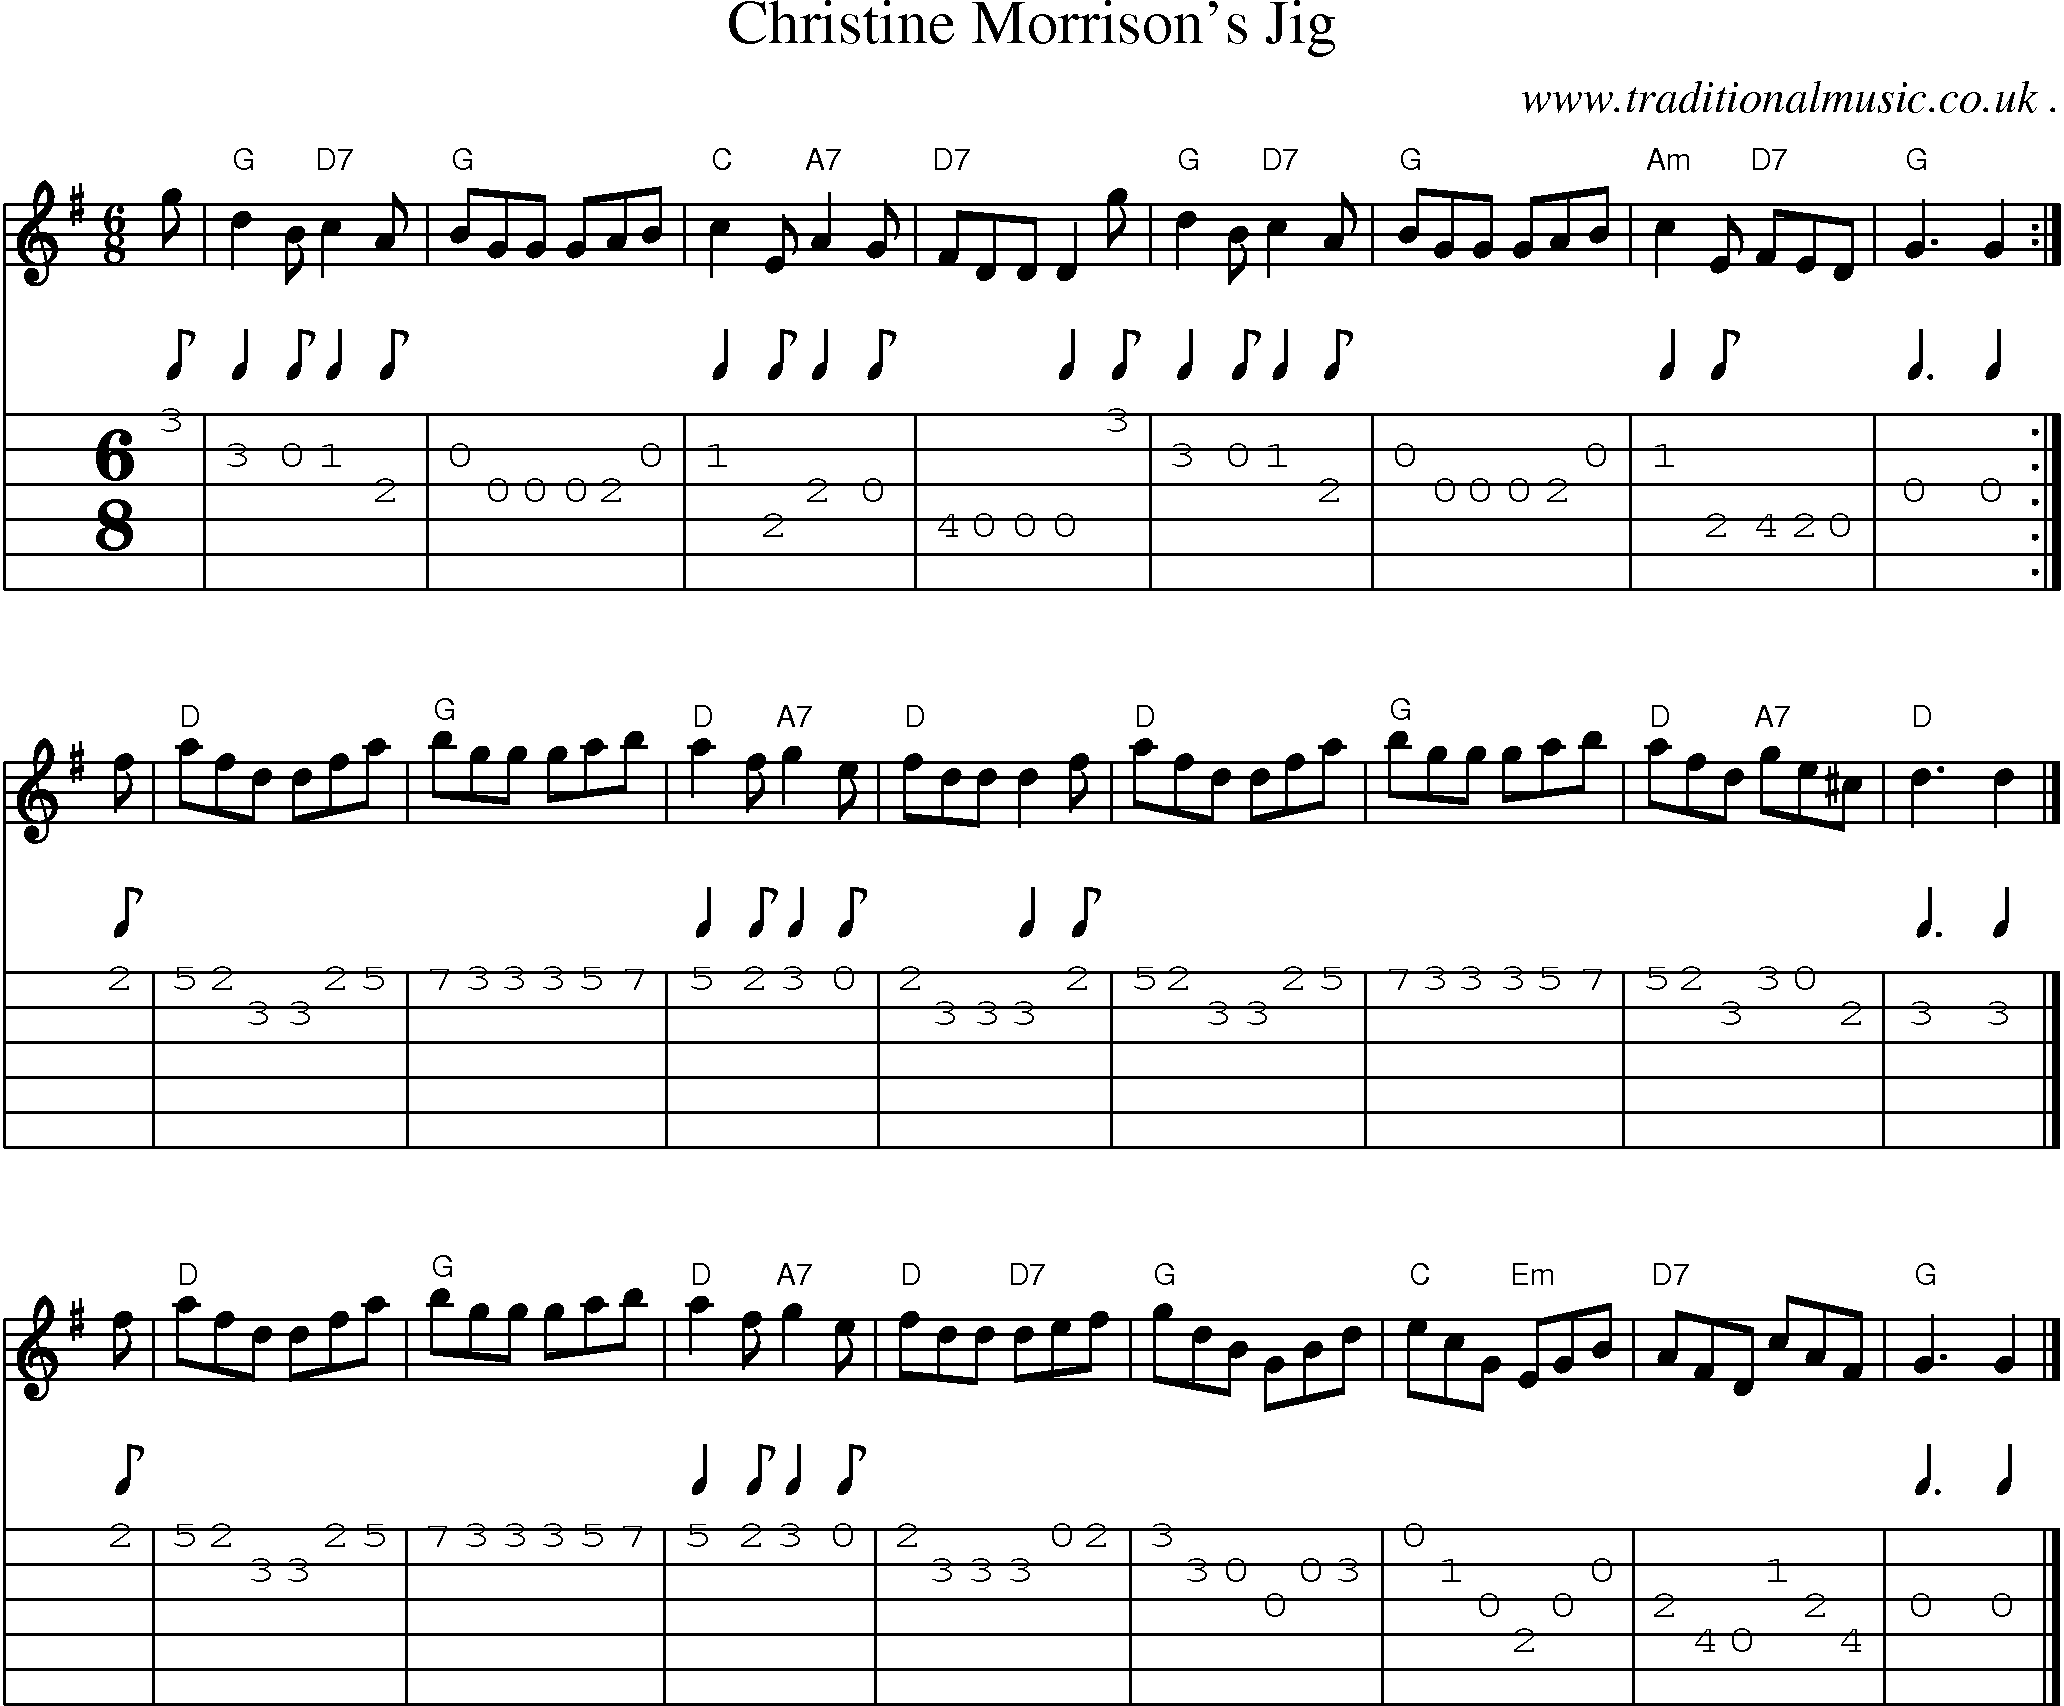 Sheet-music  score, Chords and Guitar Tabs for Christine Morrisons Jig